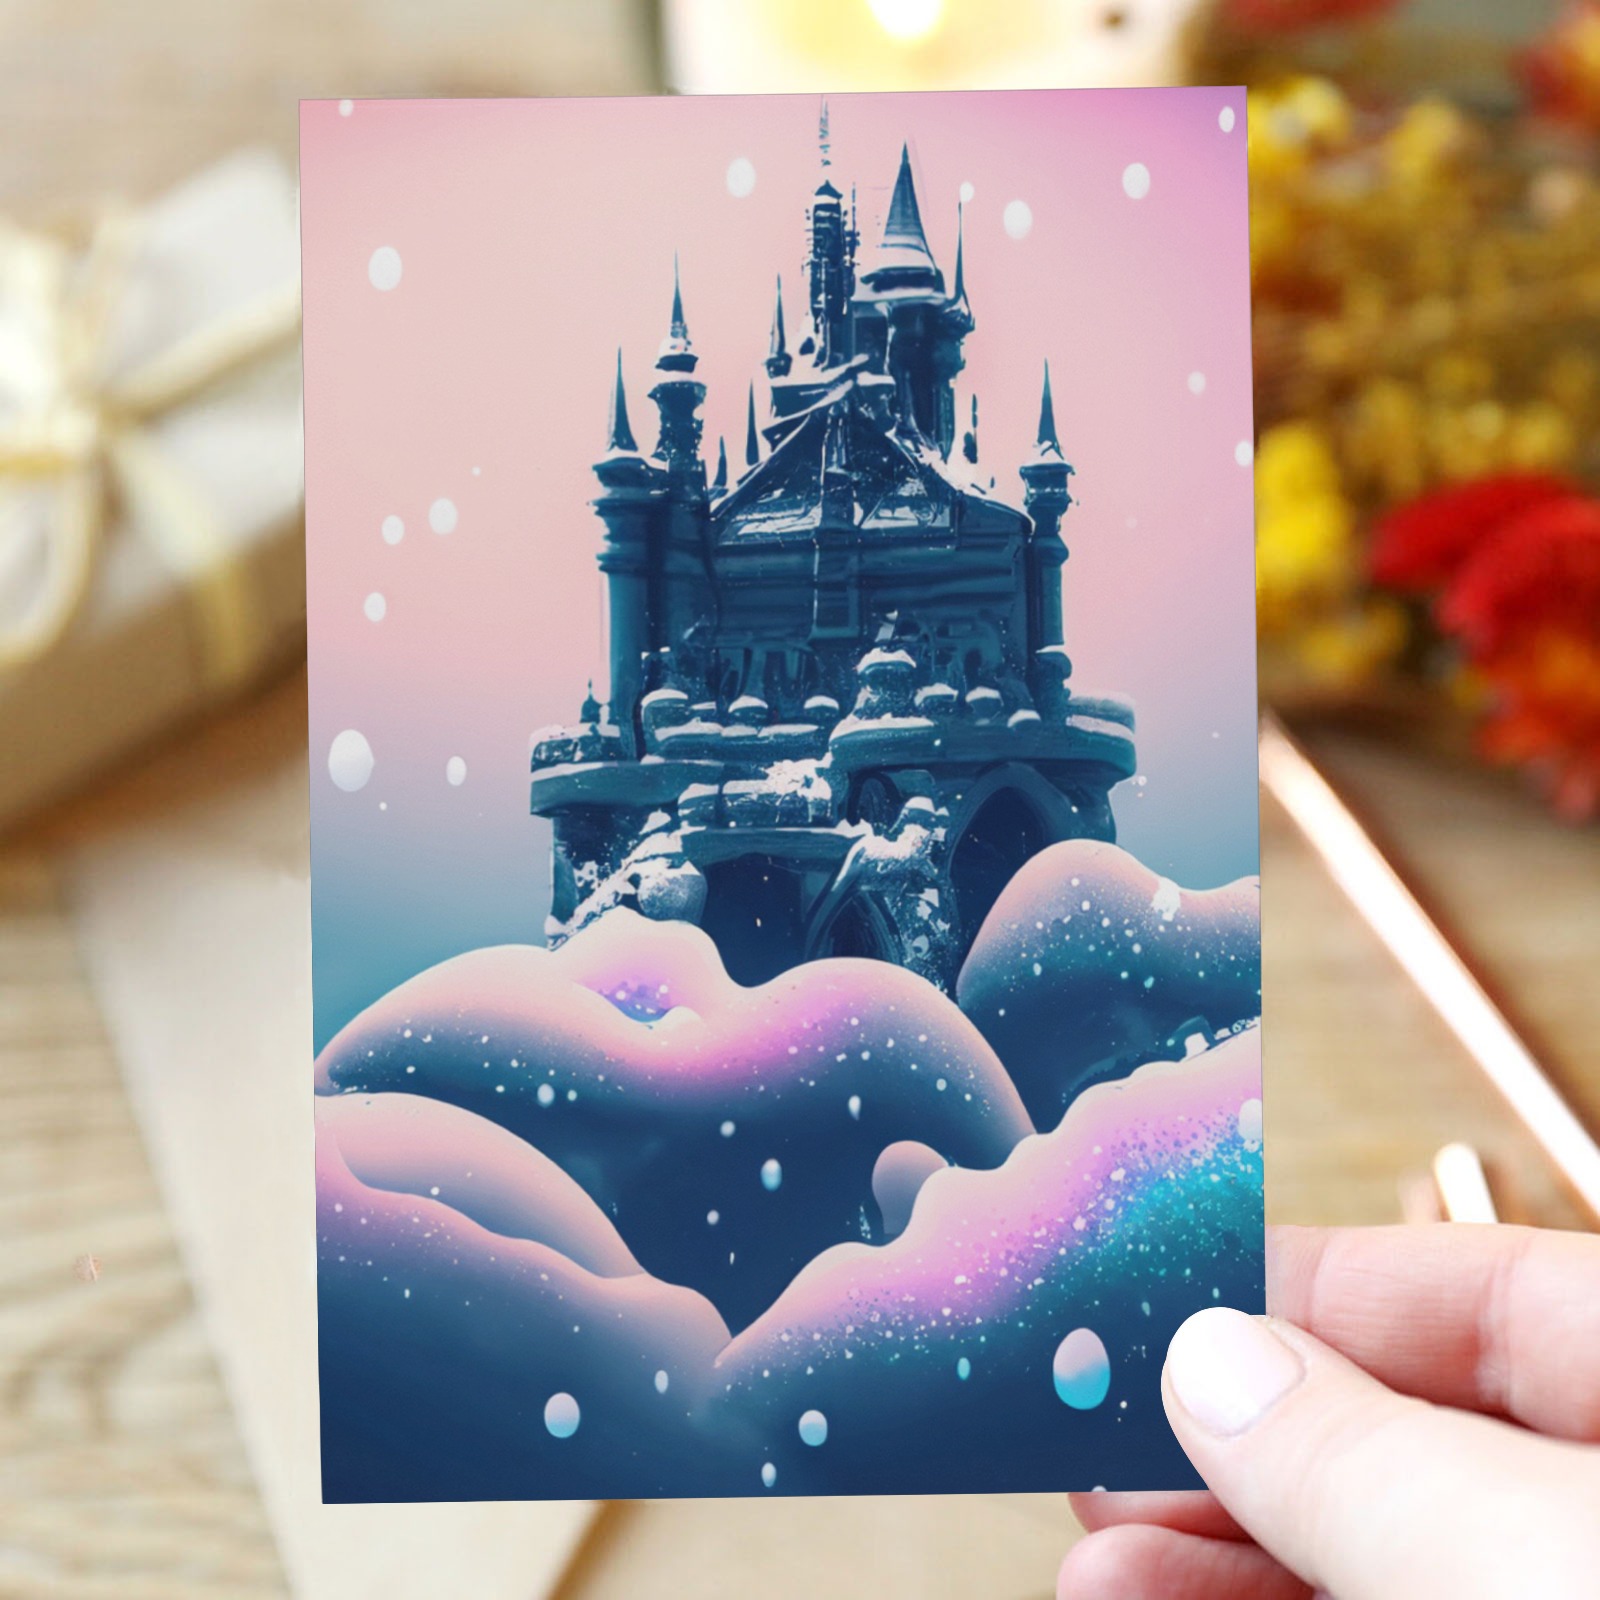 snowy background color paint droplets the image of a castle on clouds 2 Greeting Card 4"x6"